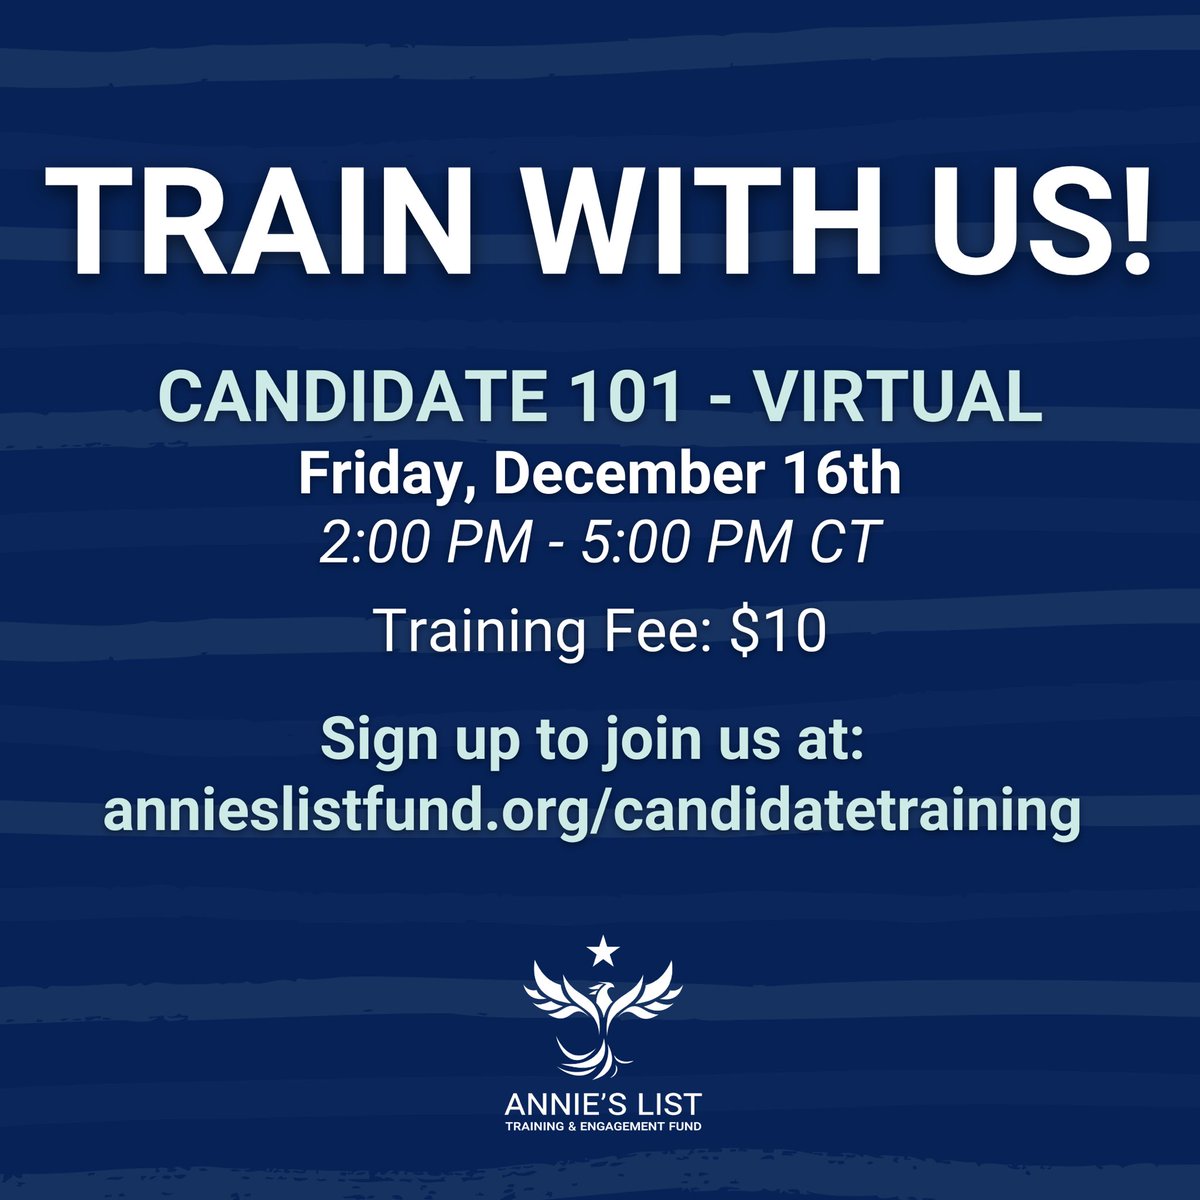 🗣️🗣️ Last chance to join us tomorrow for Candidate 101!

Learn more at annieslistfund.org/candidatetrain… and sign up to join us here: bit.ly/3FBcKbn